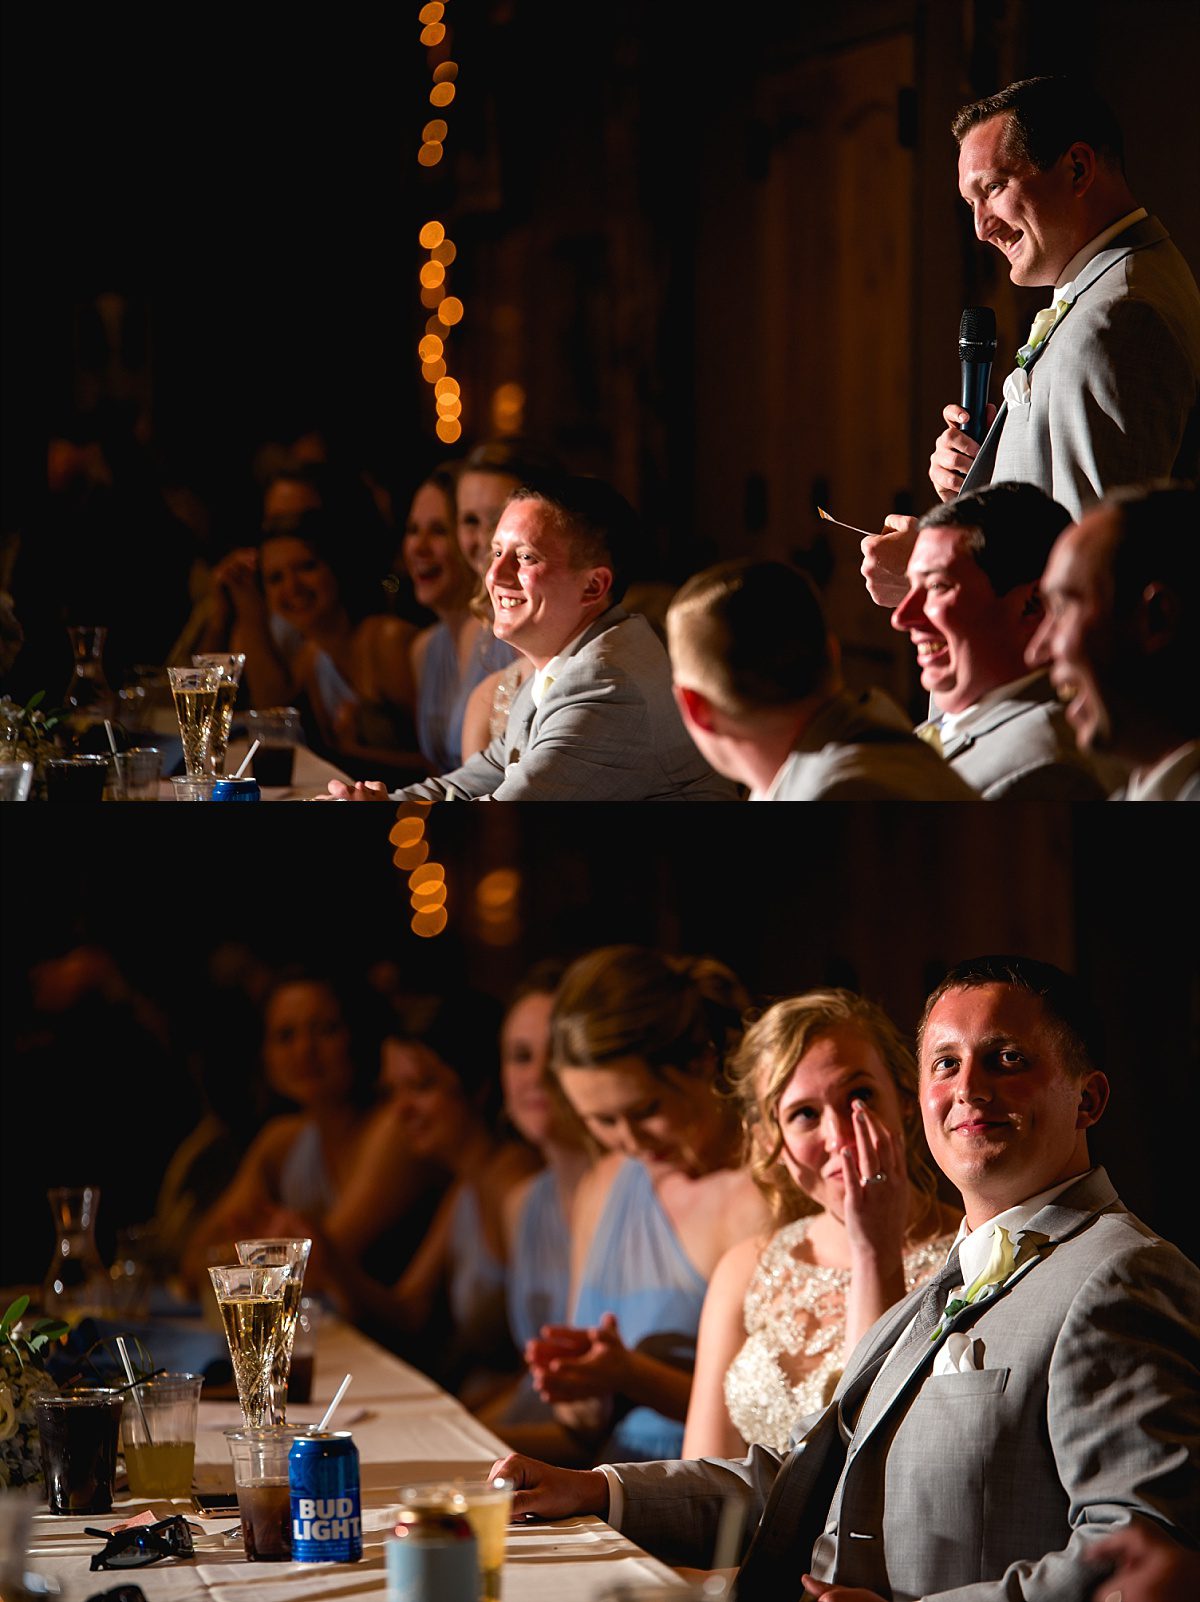 candid moments at wedding reception | Noblesville, IN wedding photographer